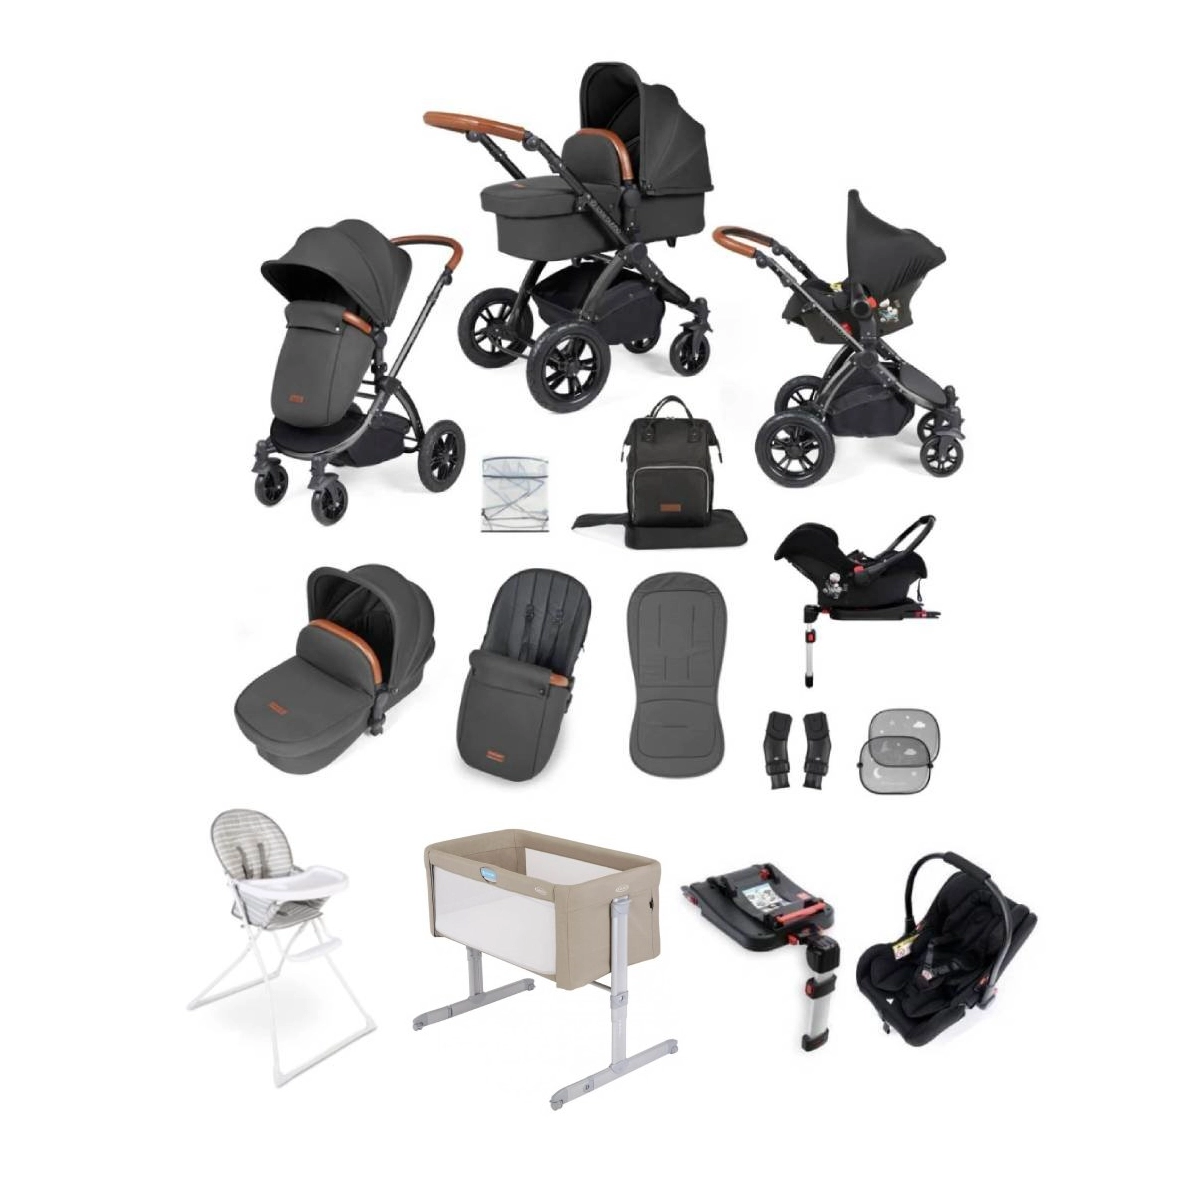 Image of Ickle Bubba Stomp Luxe 14 Piece Everything You Need Travel System Bundle (Exclusive to Kiddies Kingdom)